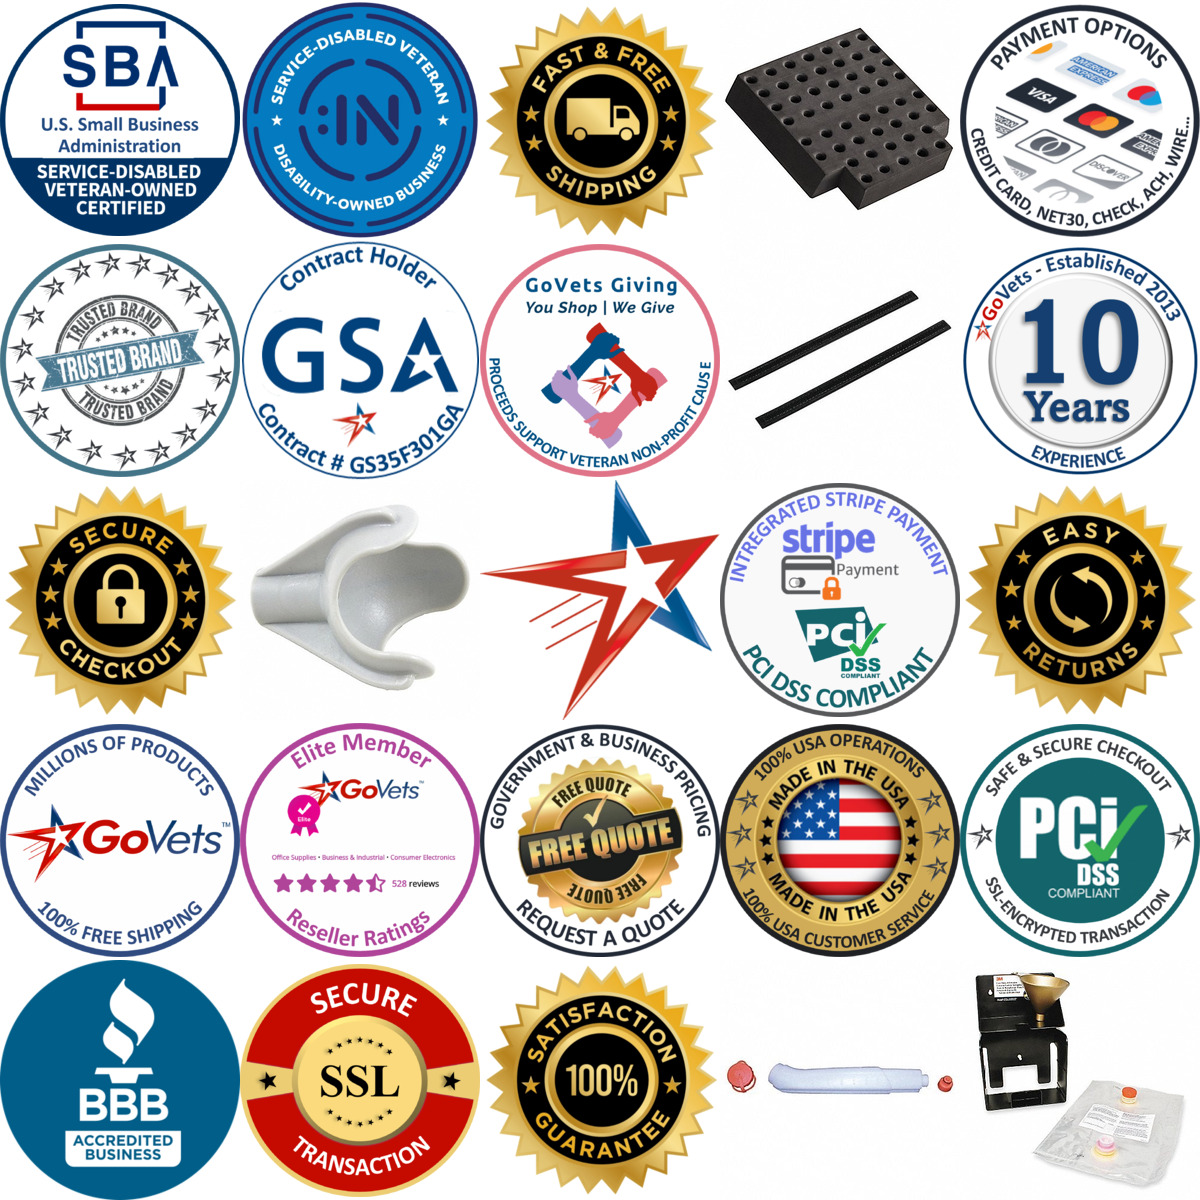 A selection of Mop Parts and Accessories products on GoVets